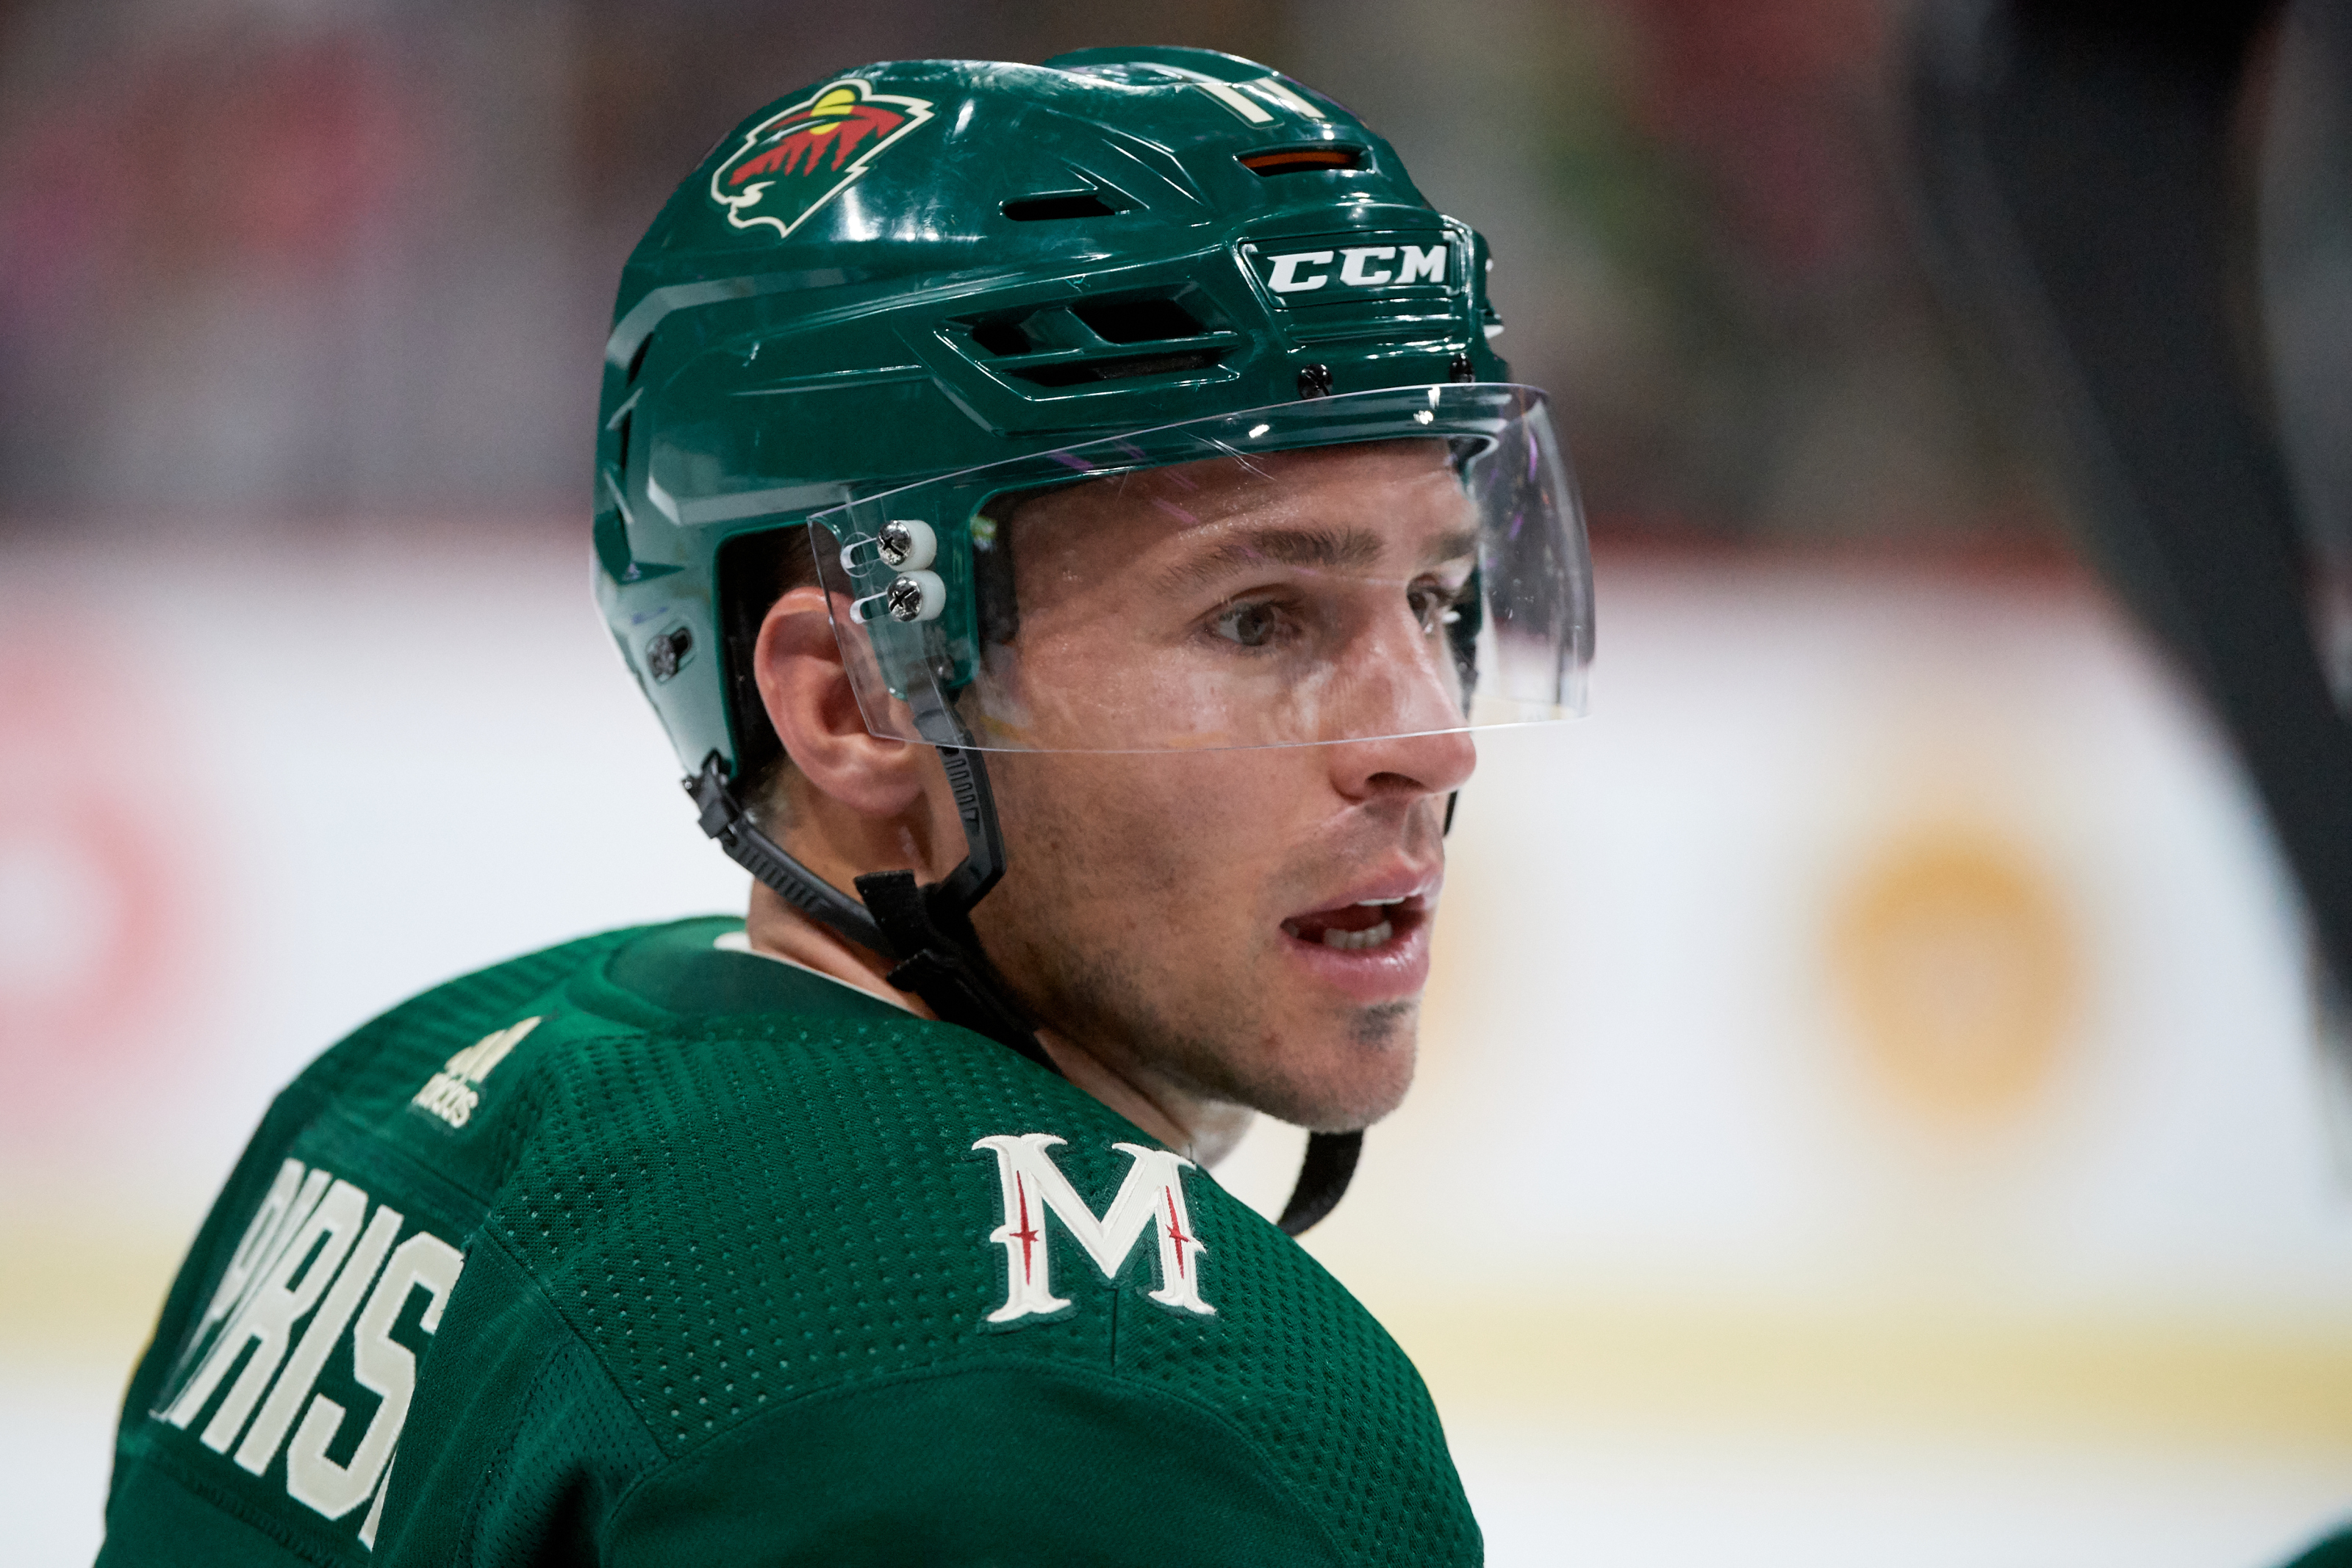 NHL: What Will the New Jersey Devils Do About Zach Parise?